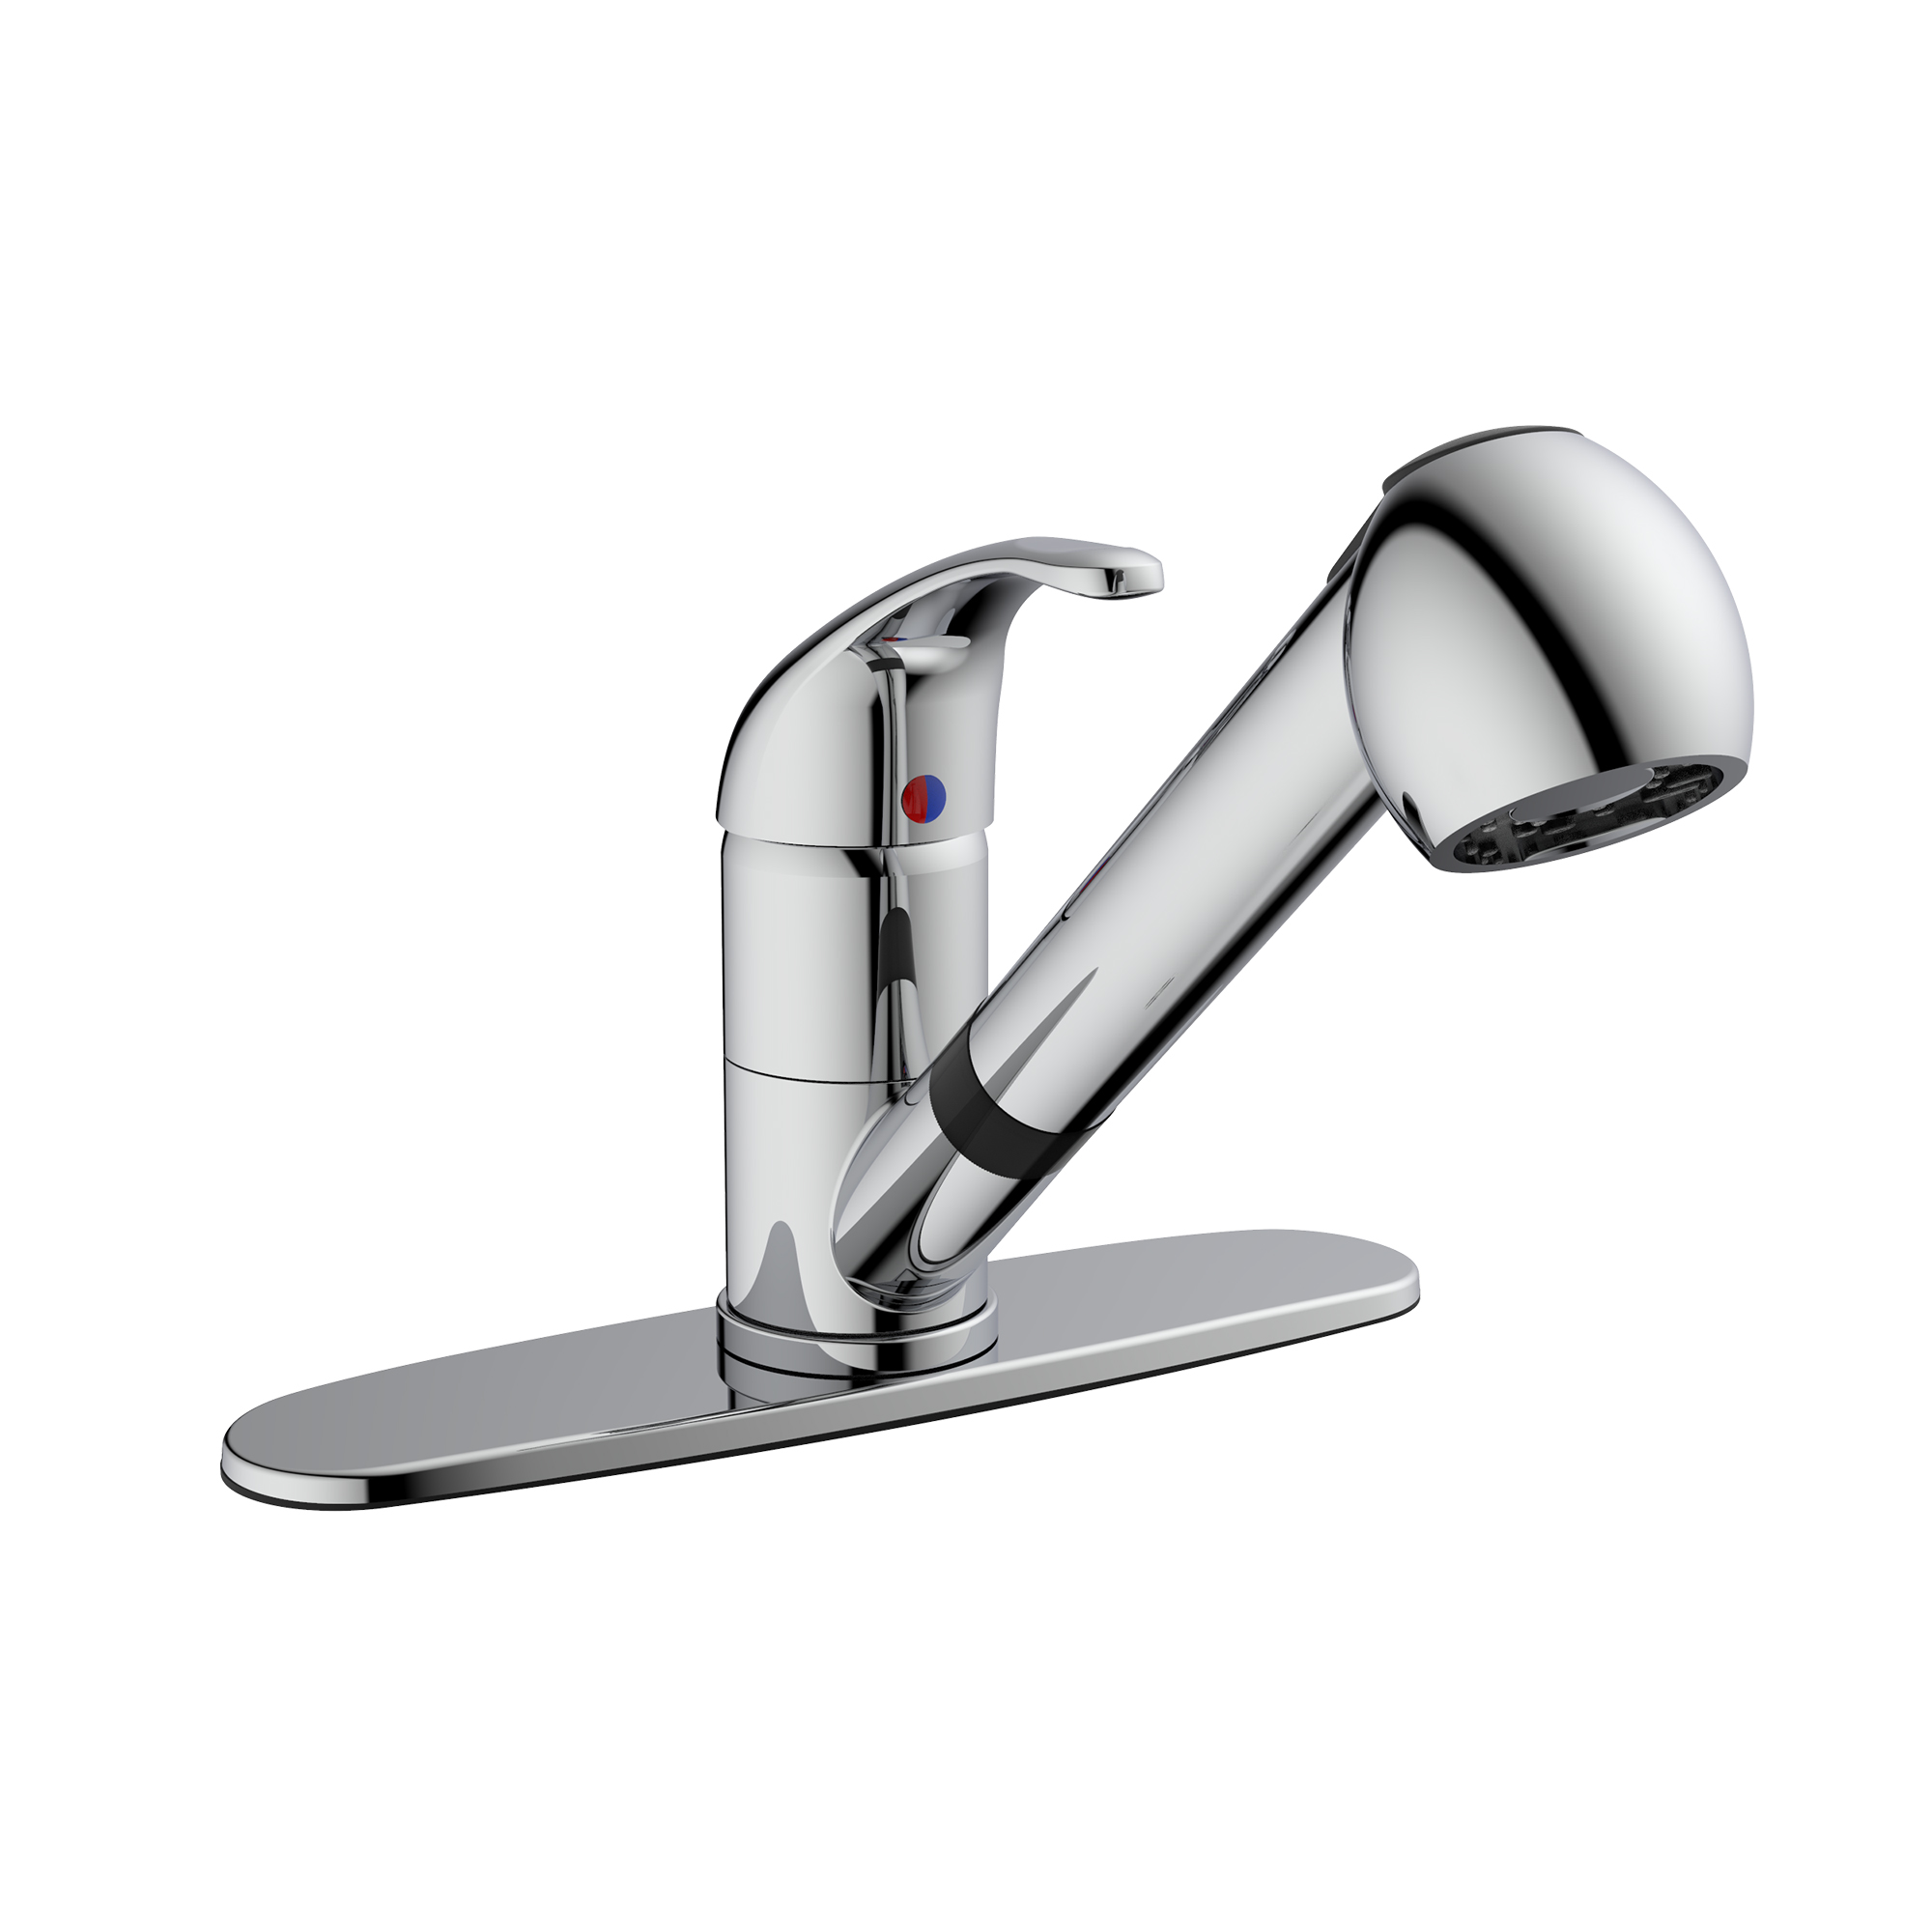 Eby77ccp 11.02 X 12.8 X 2.36 In. Kitchen Sink Faucet With Pull Out Spout & 1 Handle, Polished Chrome